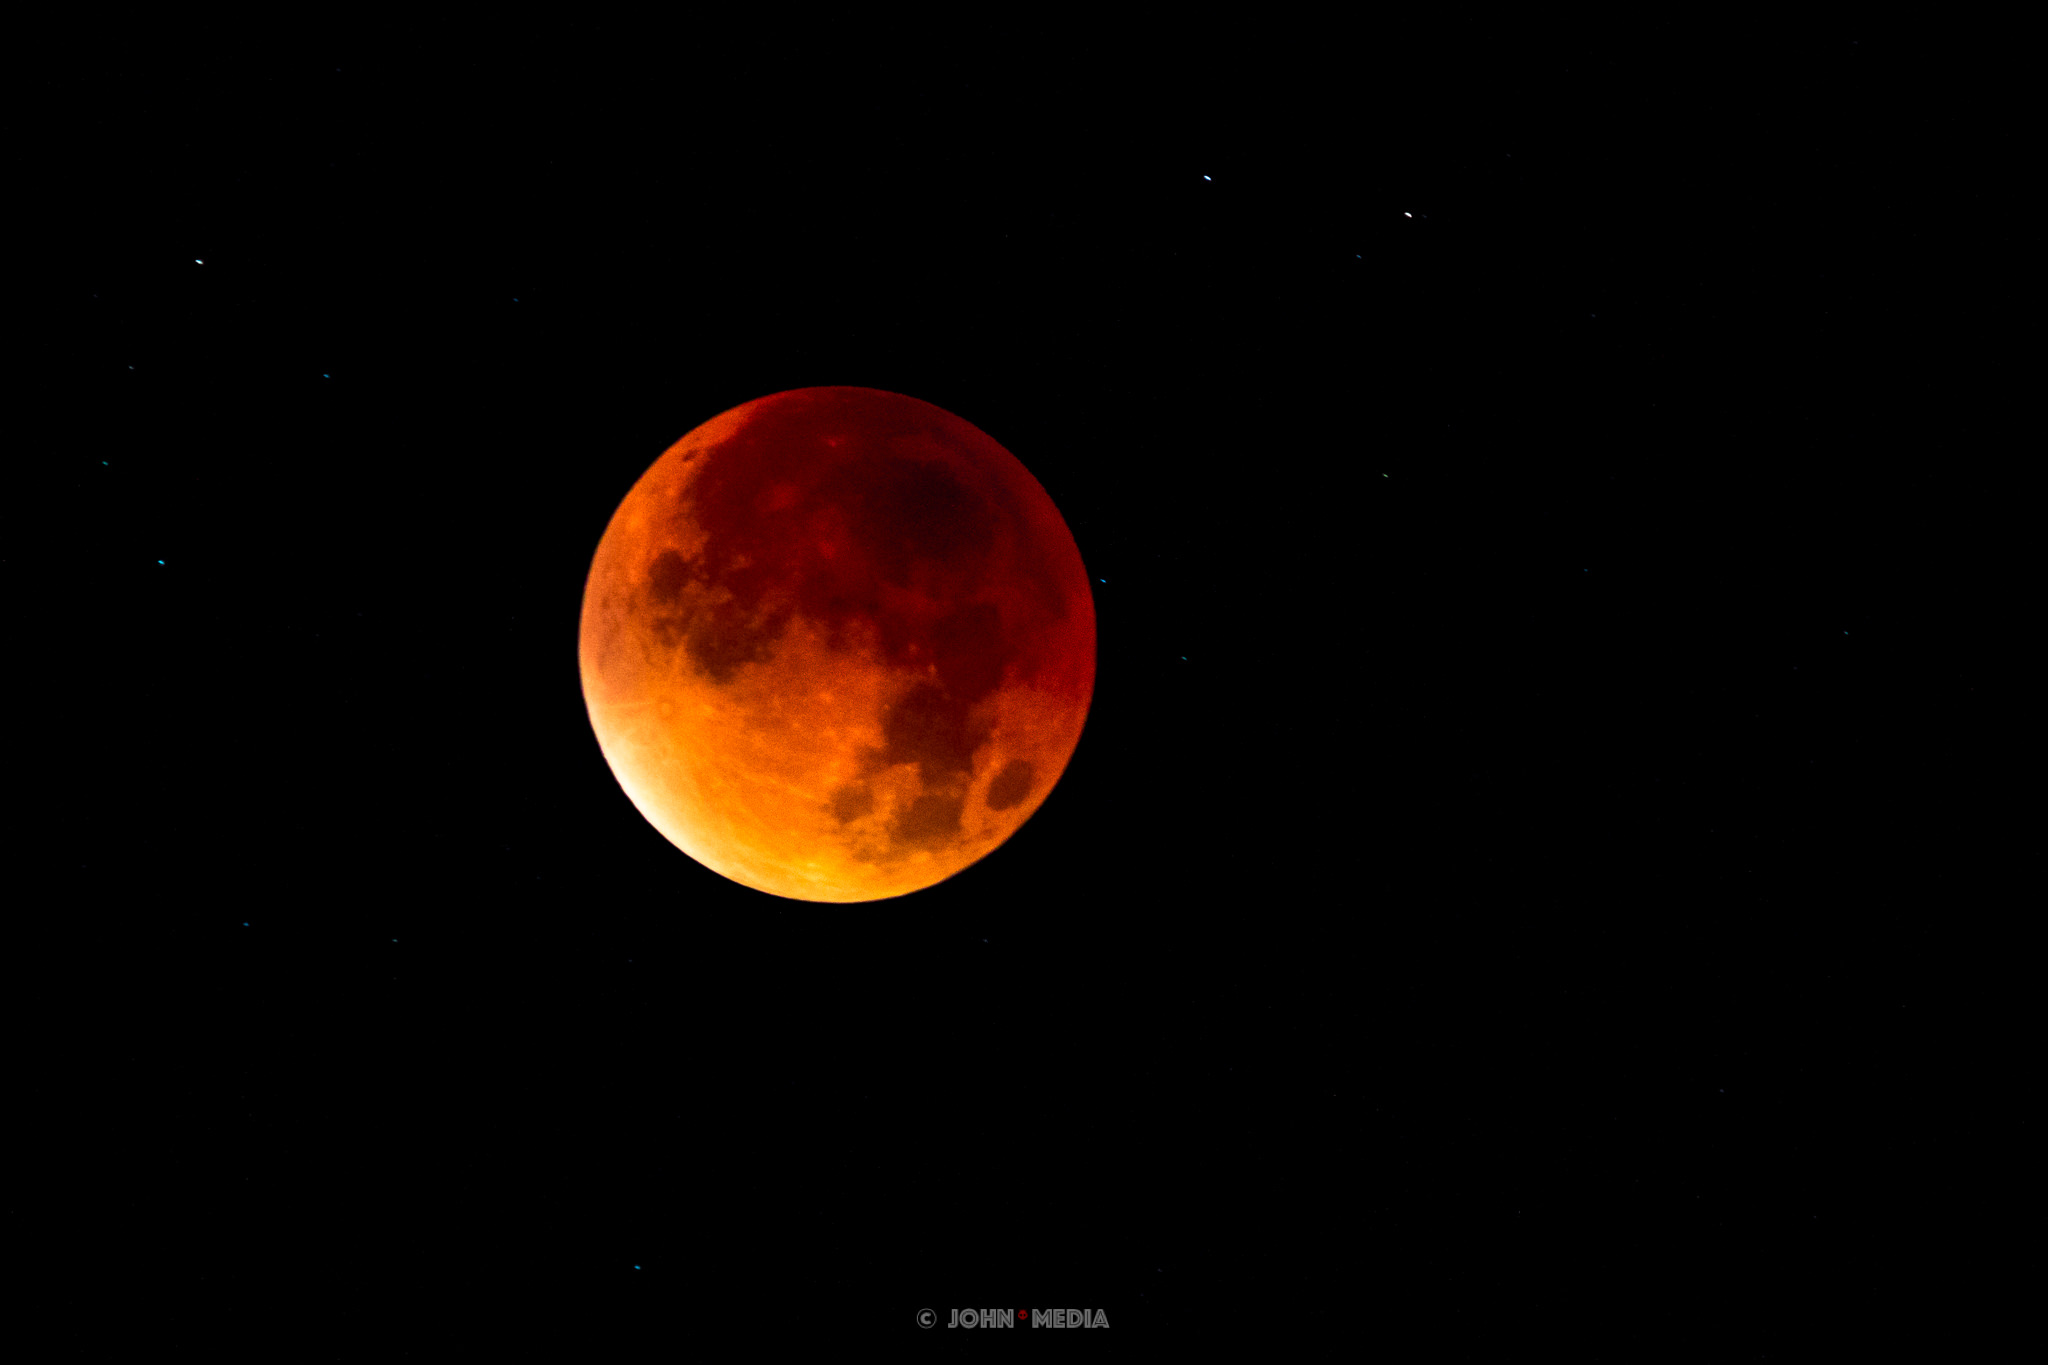 The blood moon